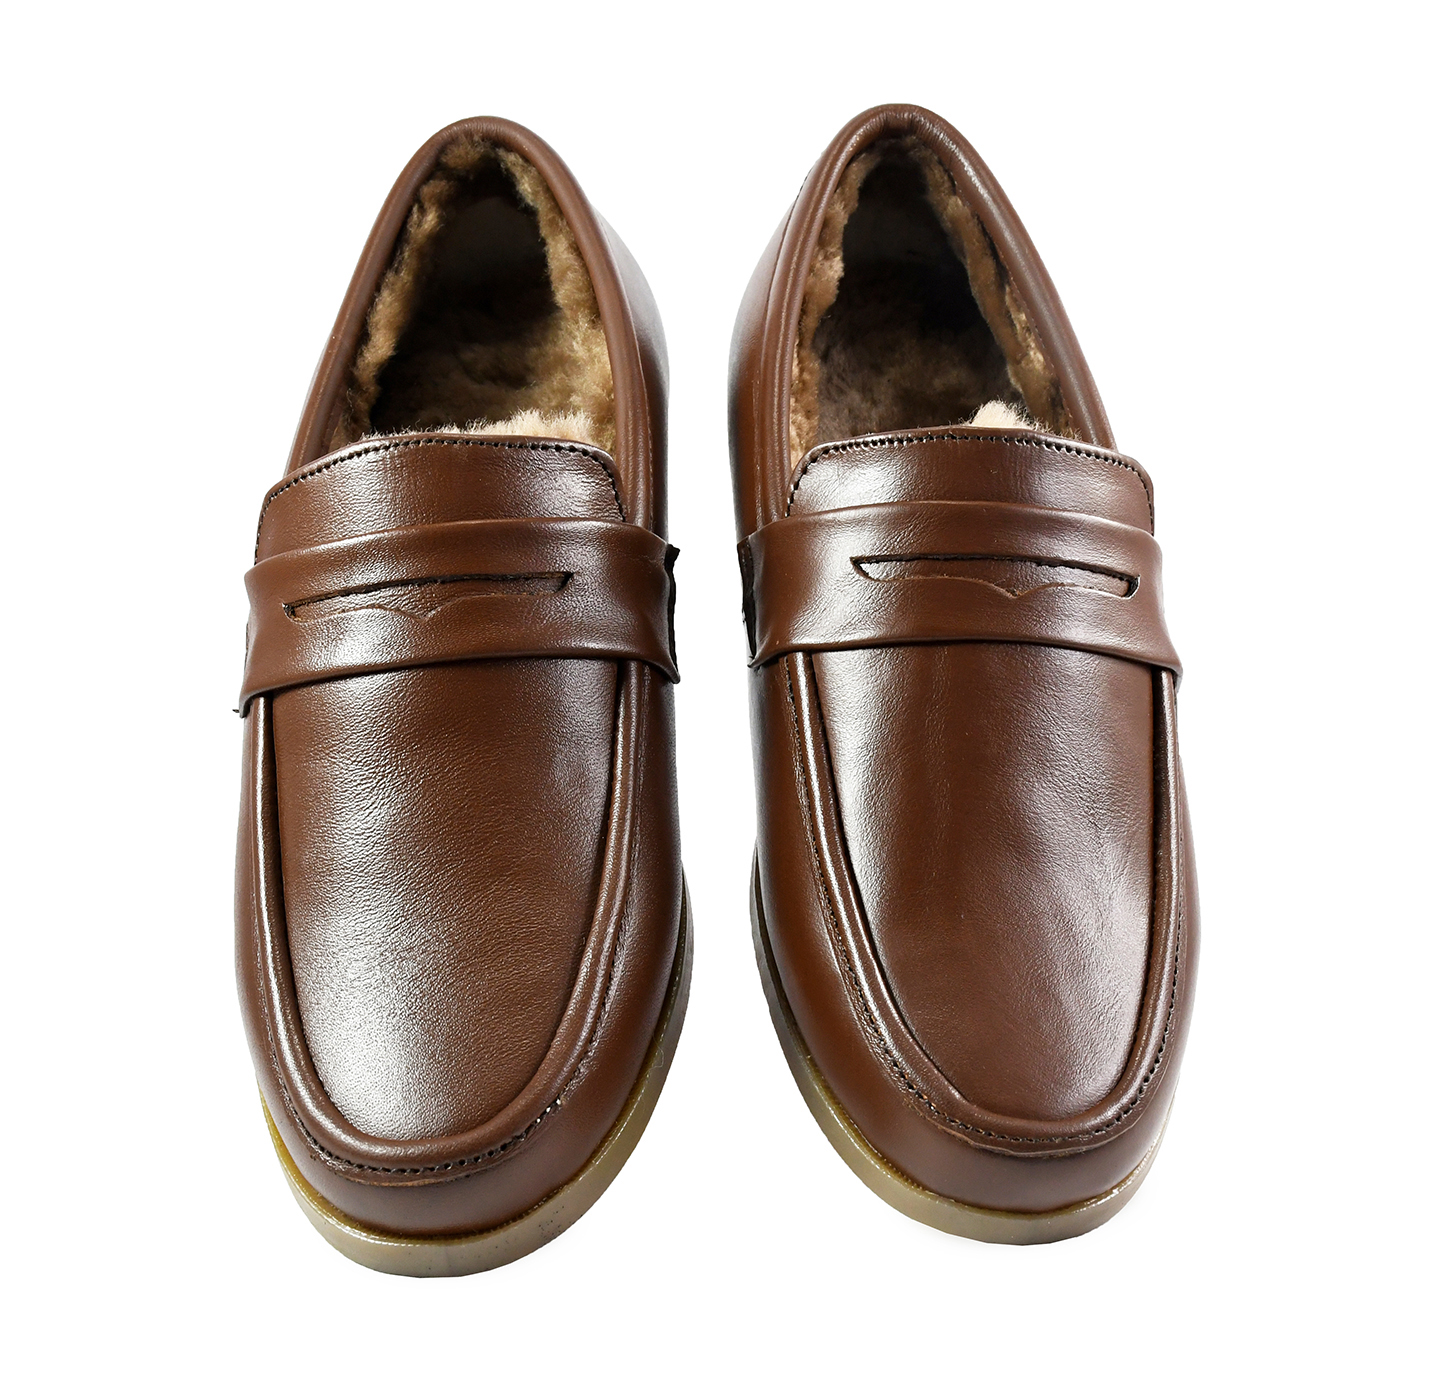 Winter Shoes : Brown Moccasins with Pure Fur, breathable Softy Leather ...